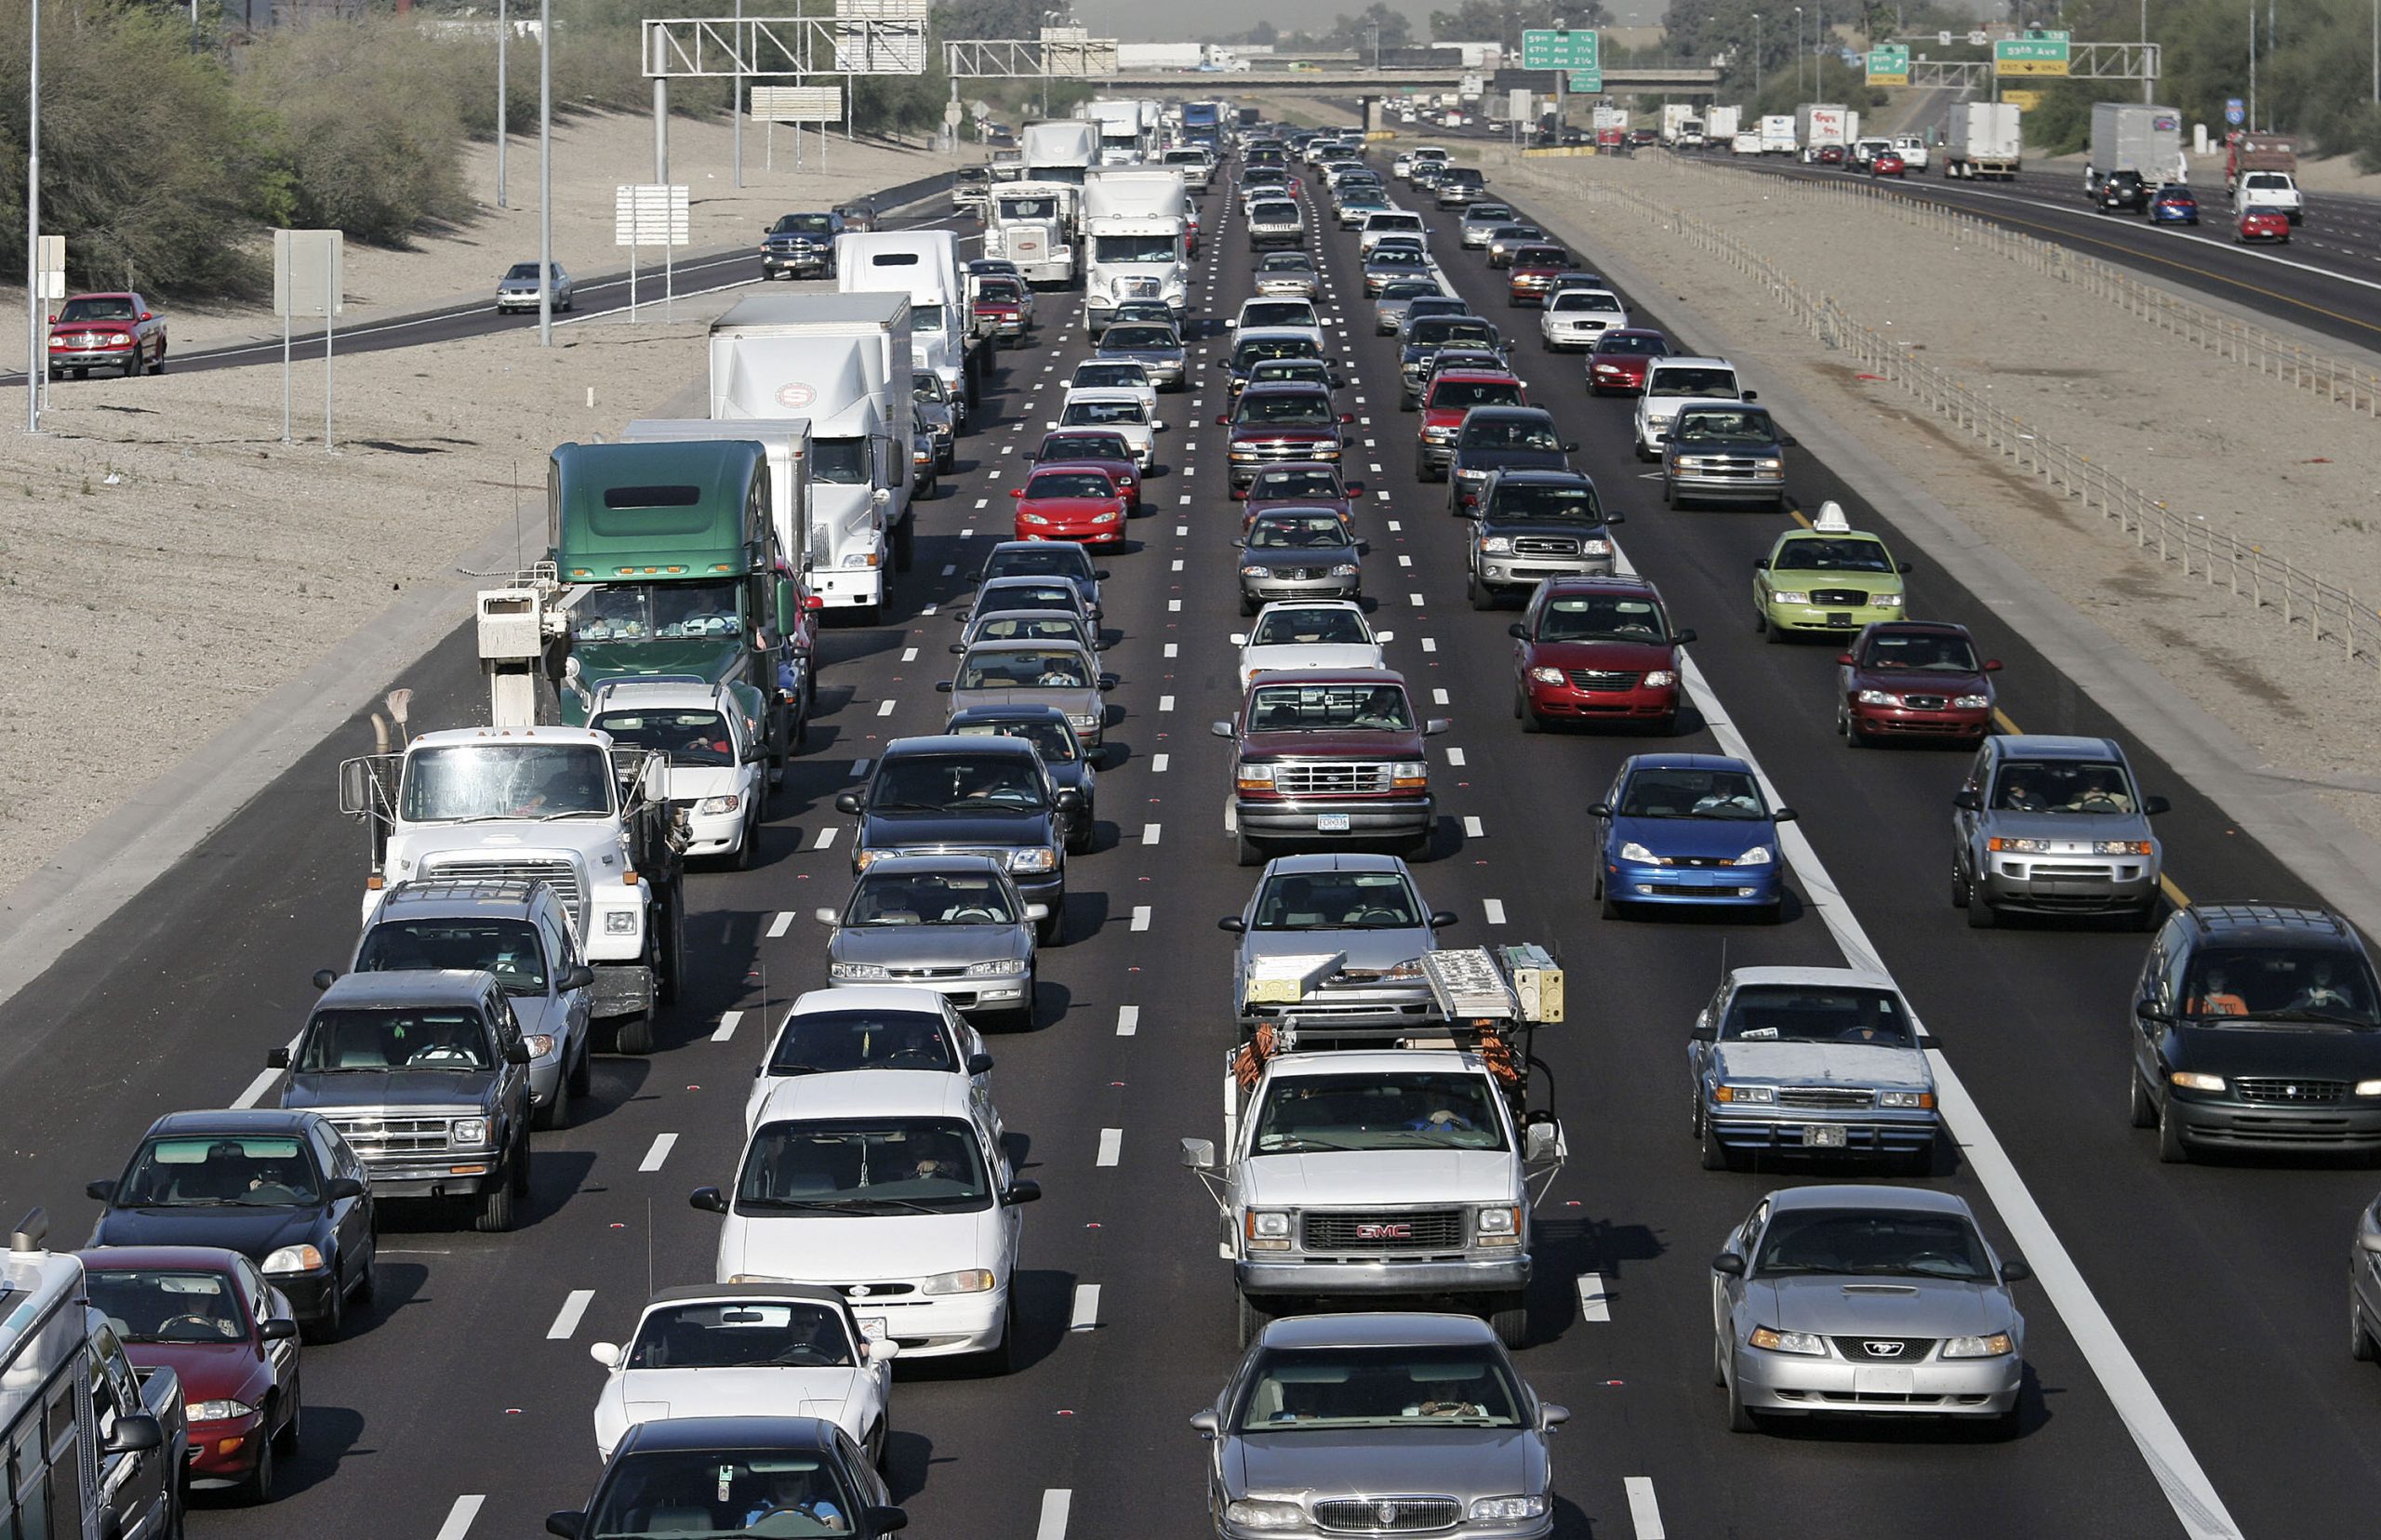 The morning rush hour commute on I10 shows a packed roadway.